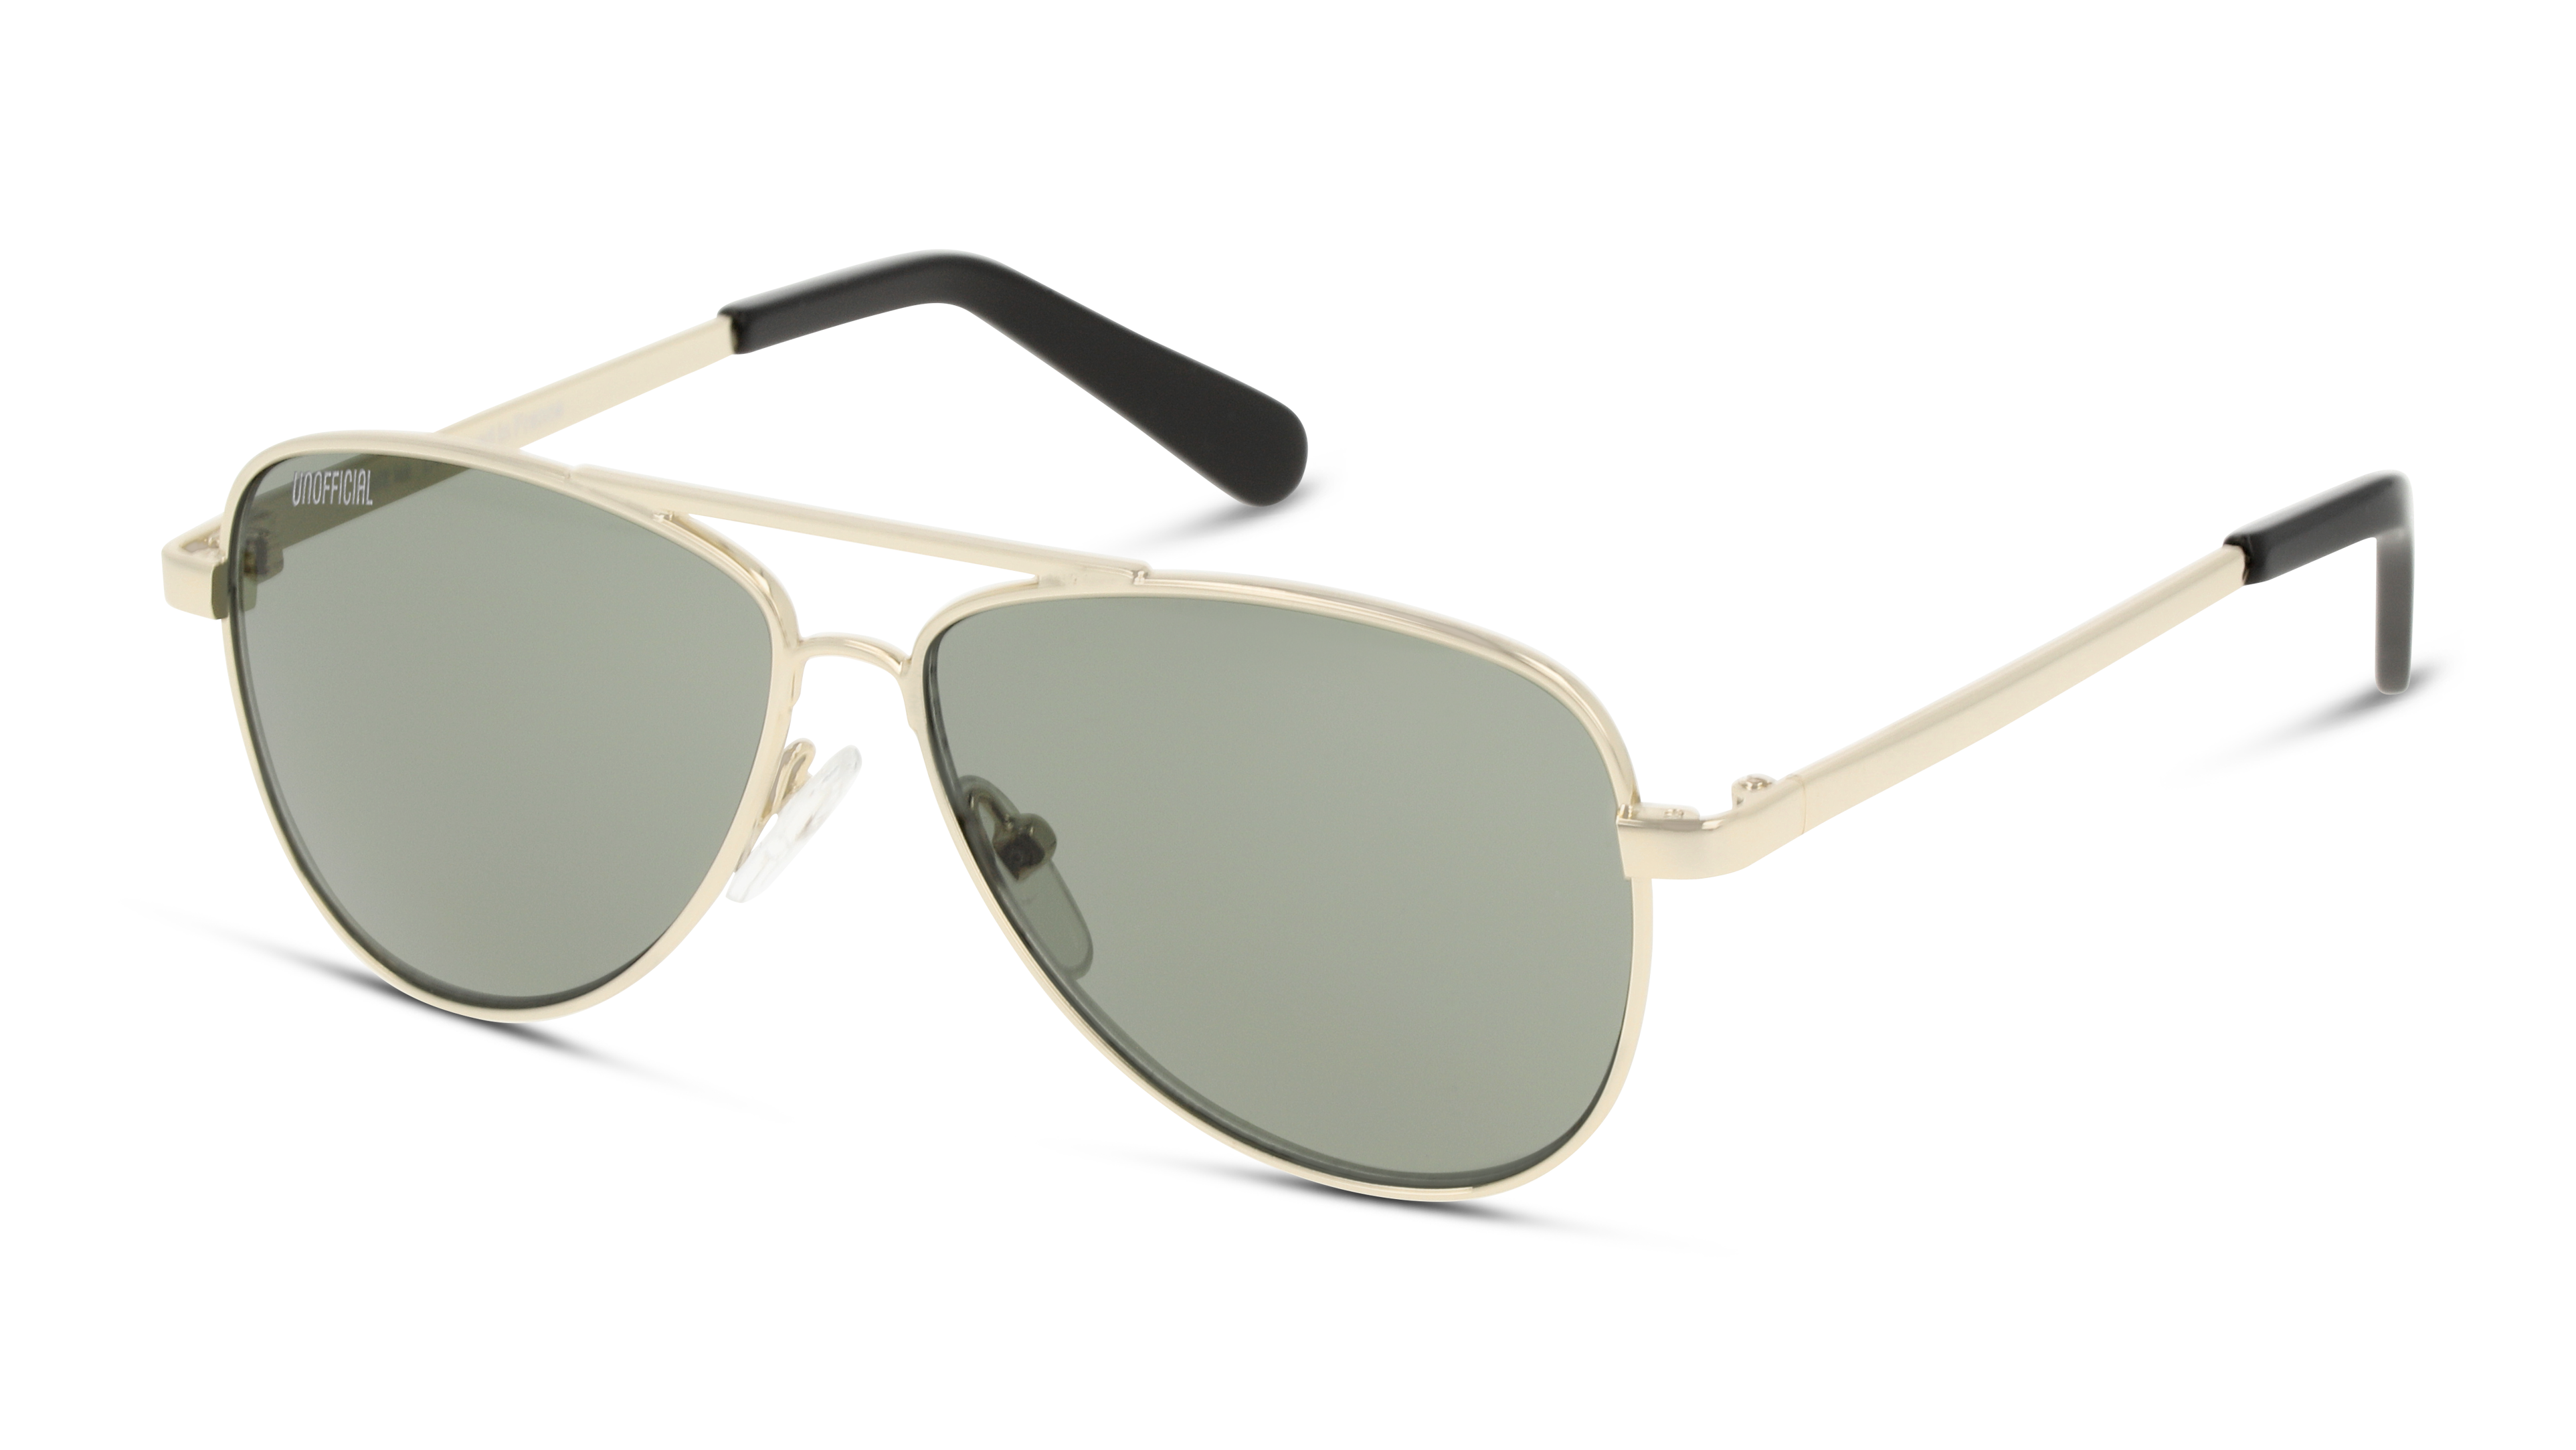 Angle_Left01 Unofficial UNSK5006 Children's Sunglasses Green / Gold